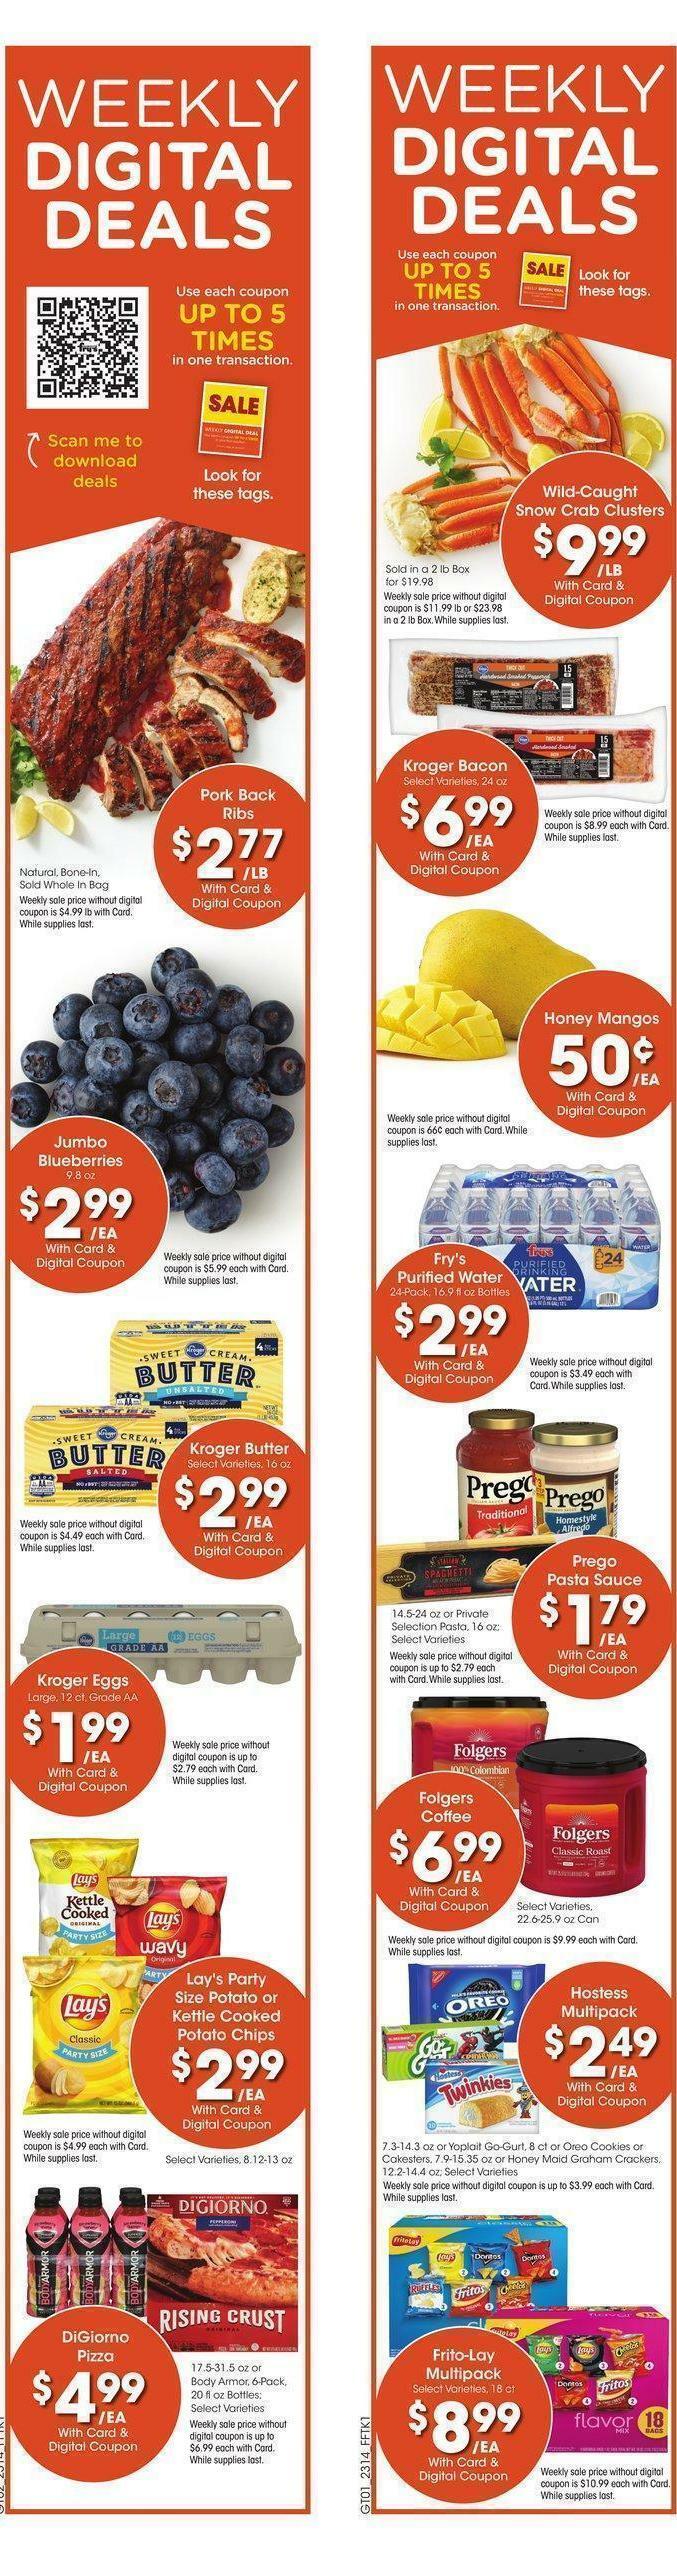 Fry's Food Weekly Ad from May 3